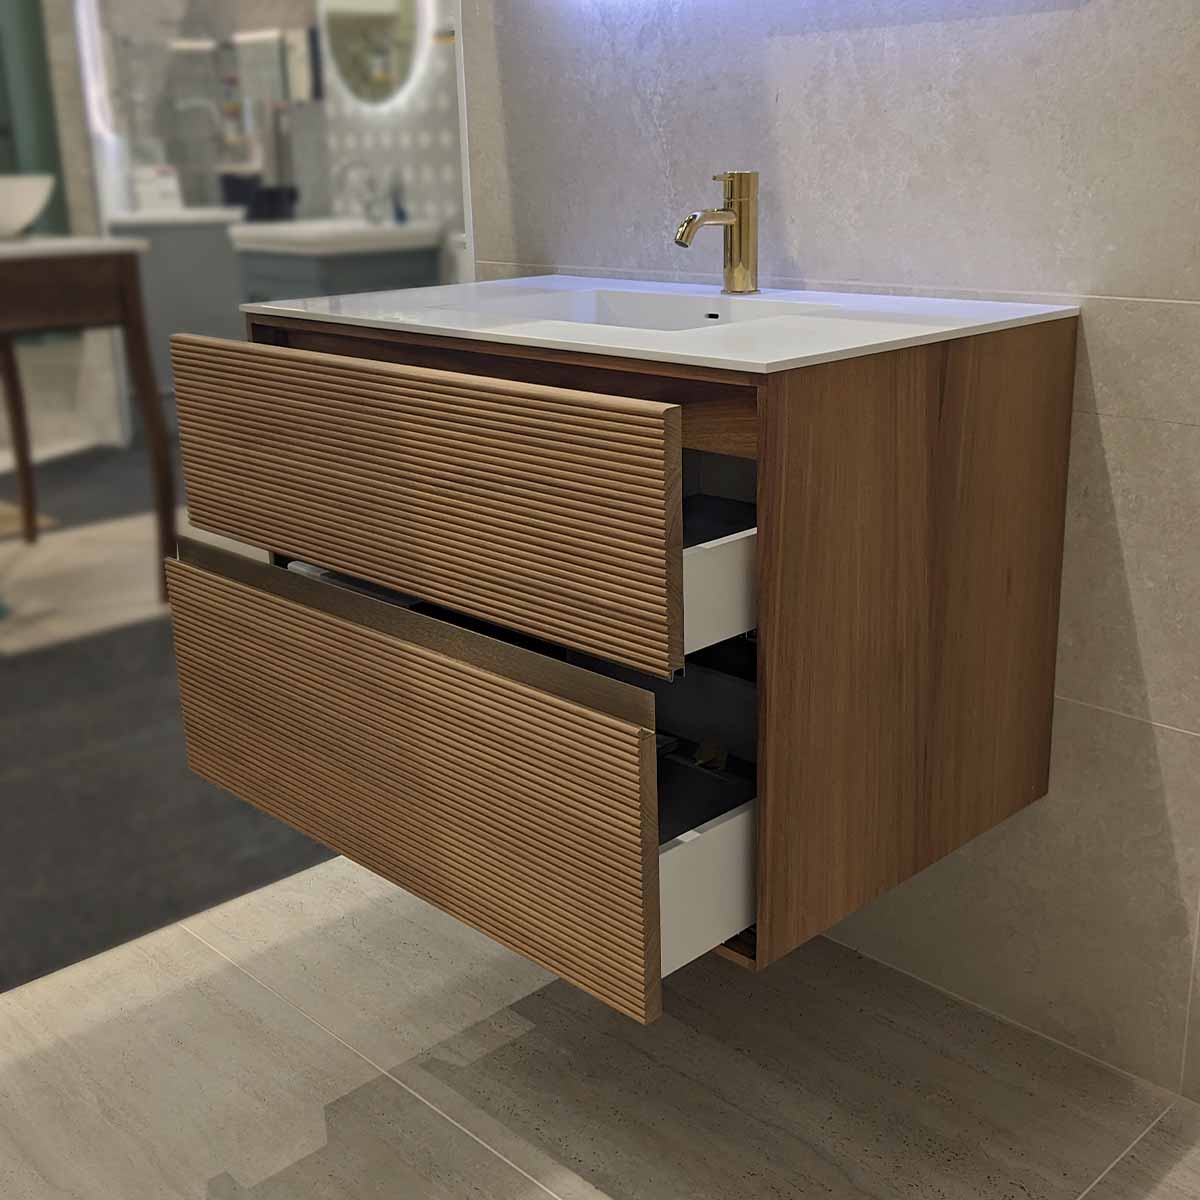 Stockholm Iroko 820 Double Drawer Wall Hung Vanity Unit With Solid Surface Washbasin